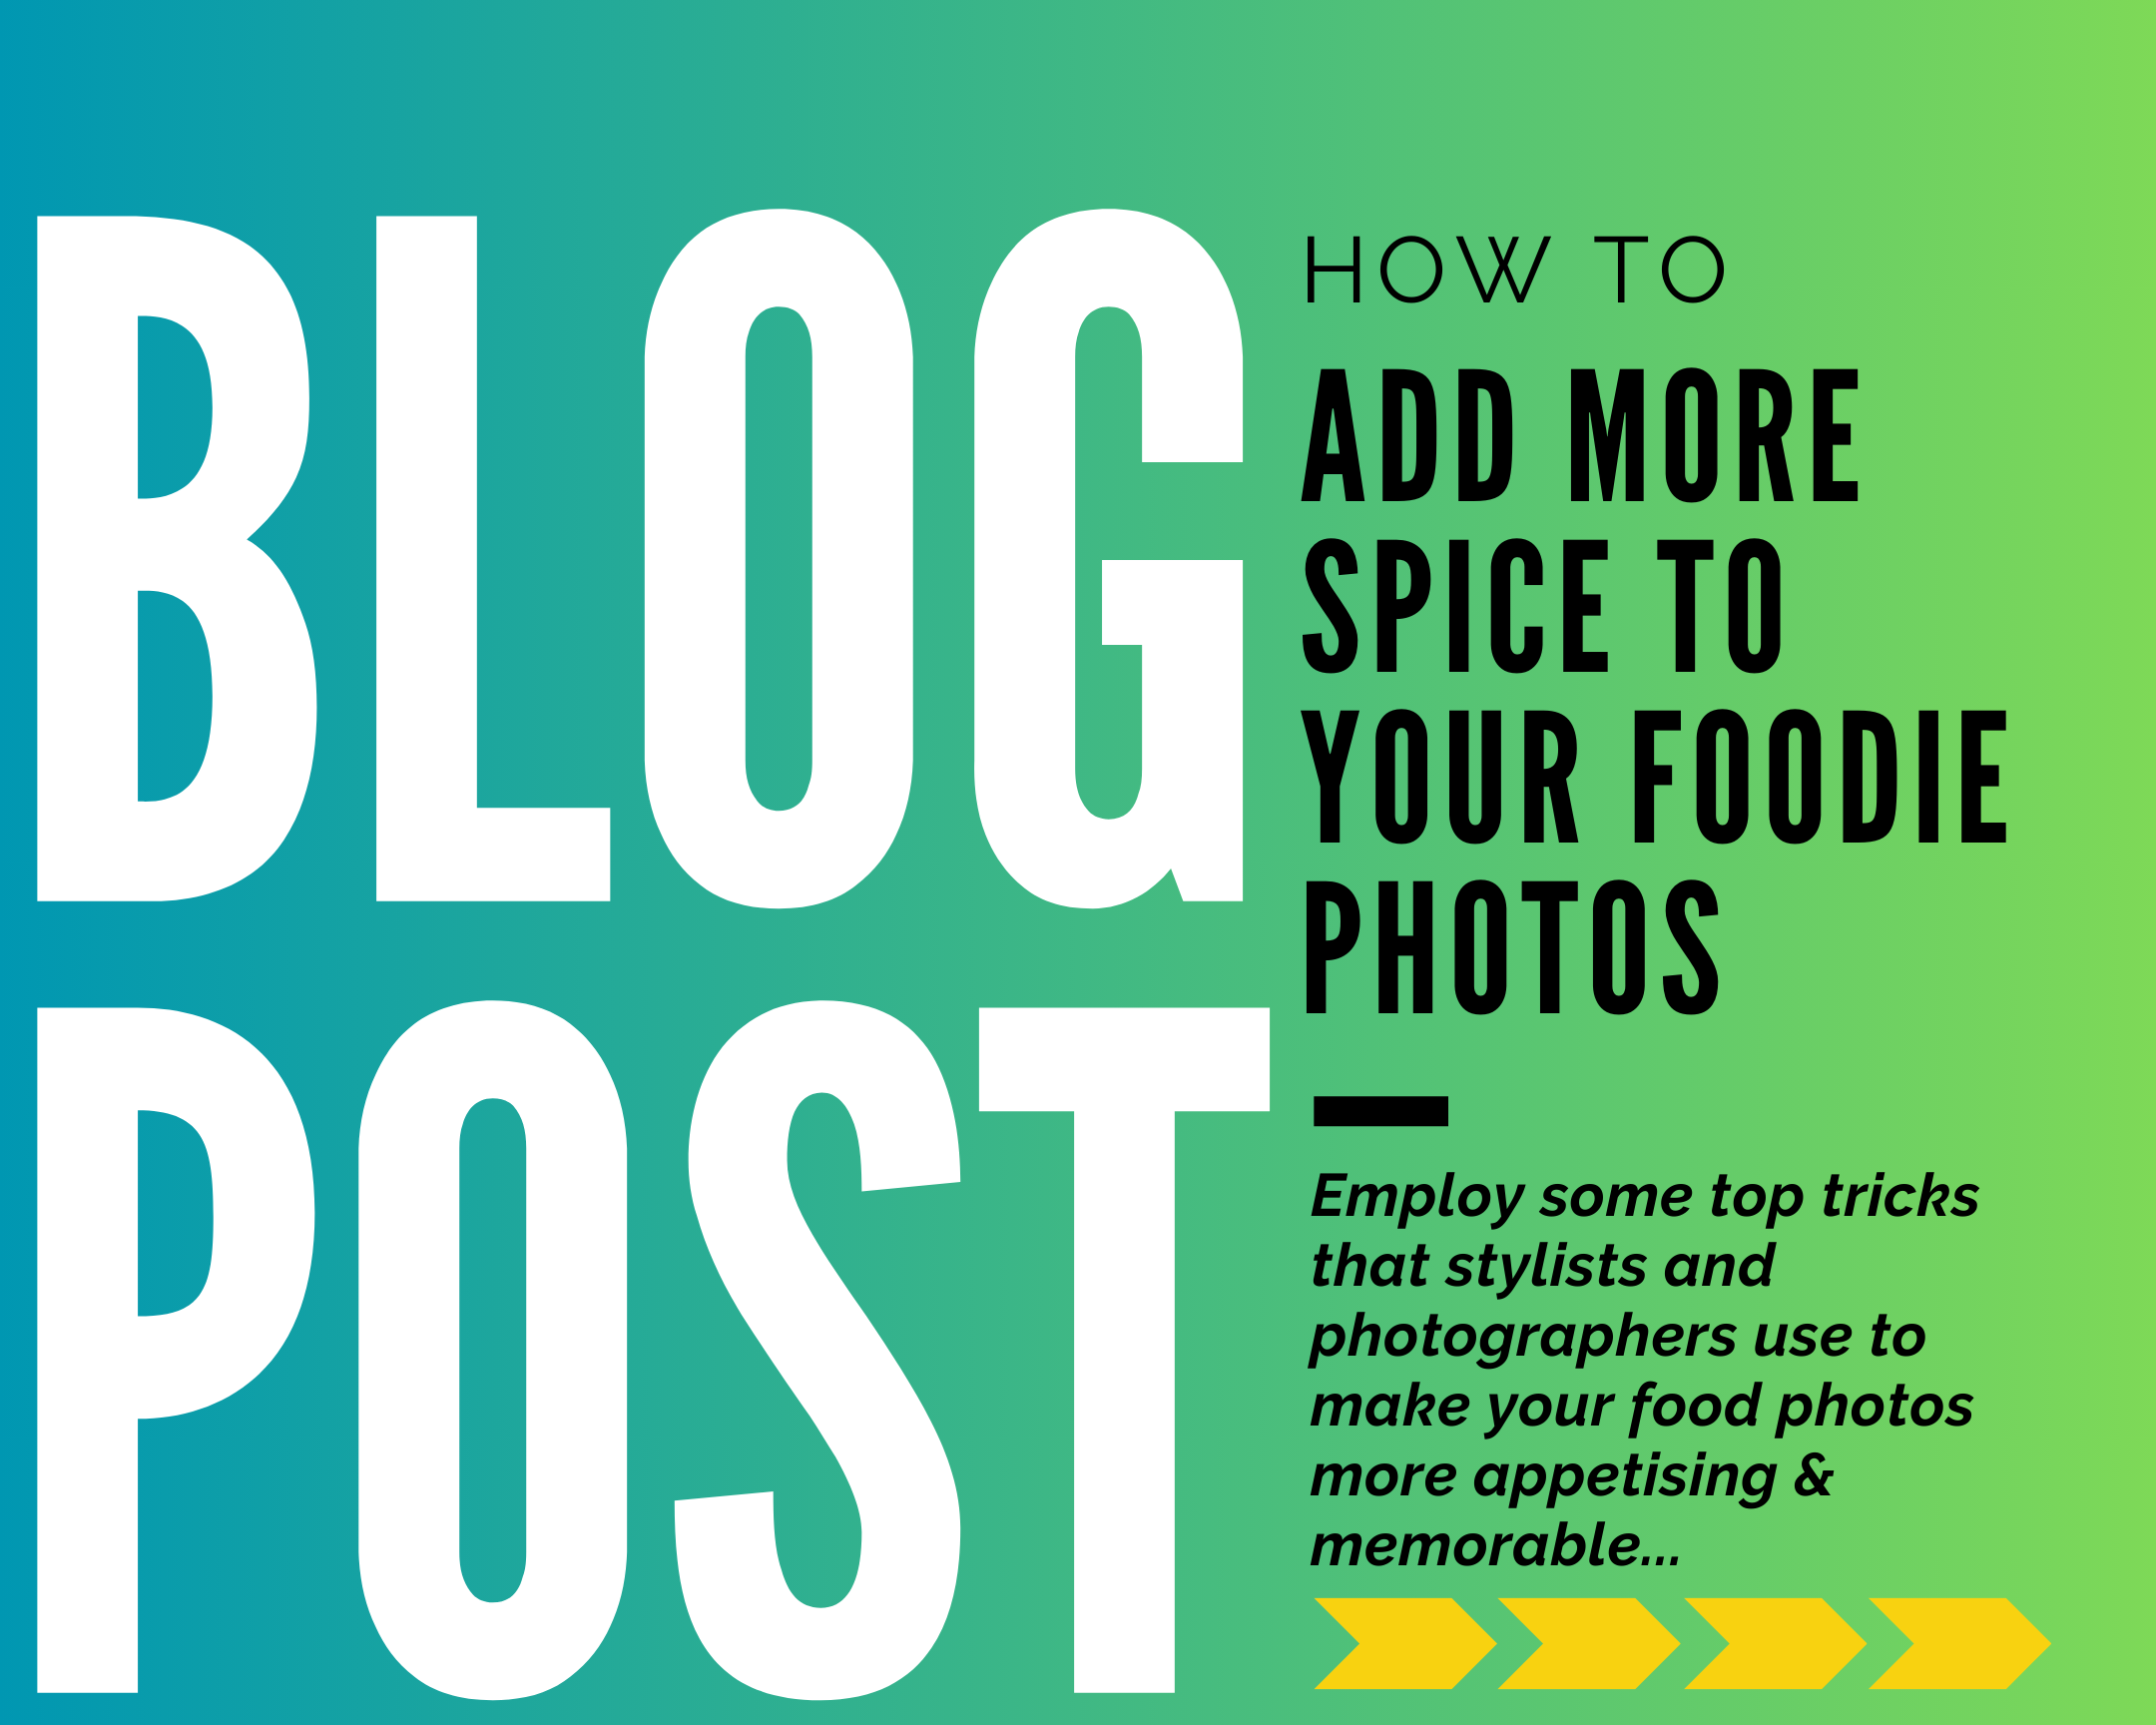 How to add more spice to your foodie photos